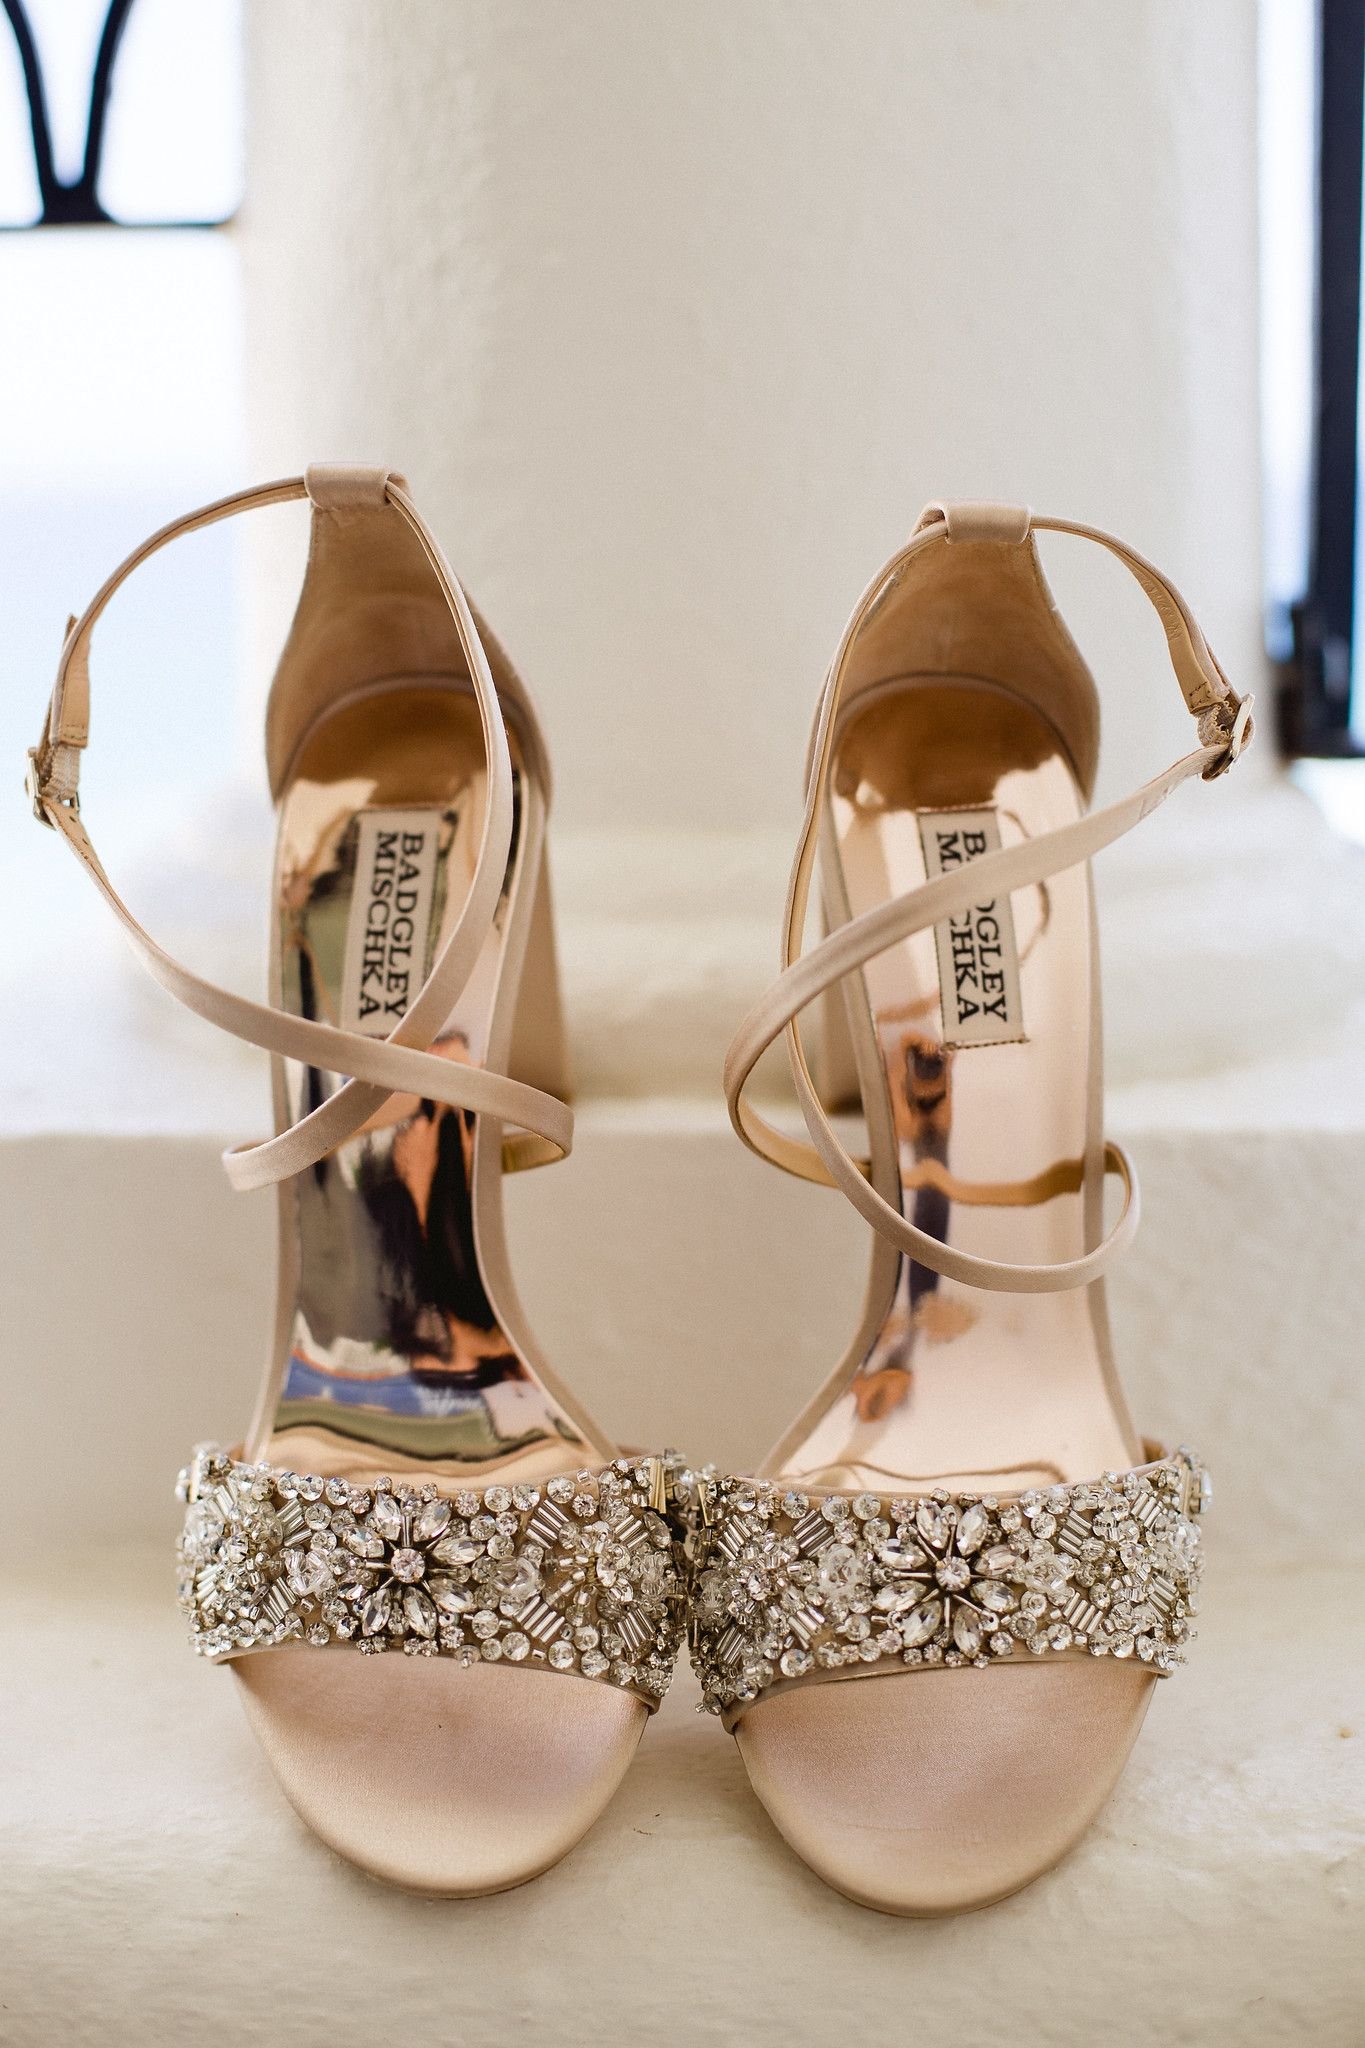 Brides shoes that were from amazing designer Badgley Mischka. They were a bronze color, with sparkle. The perfect wedding shoes to wear on such an important day!